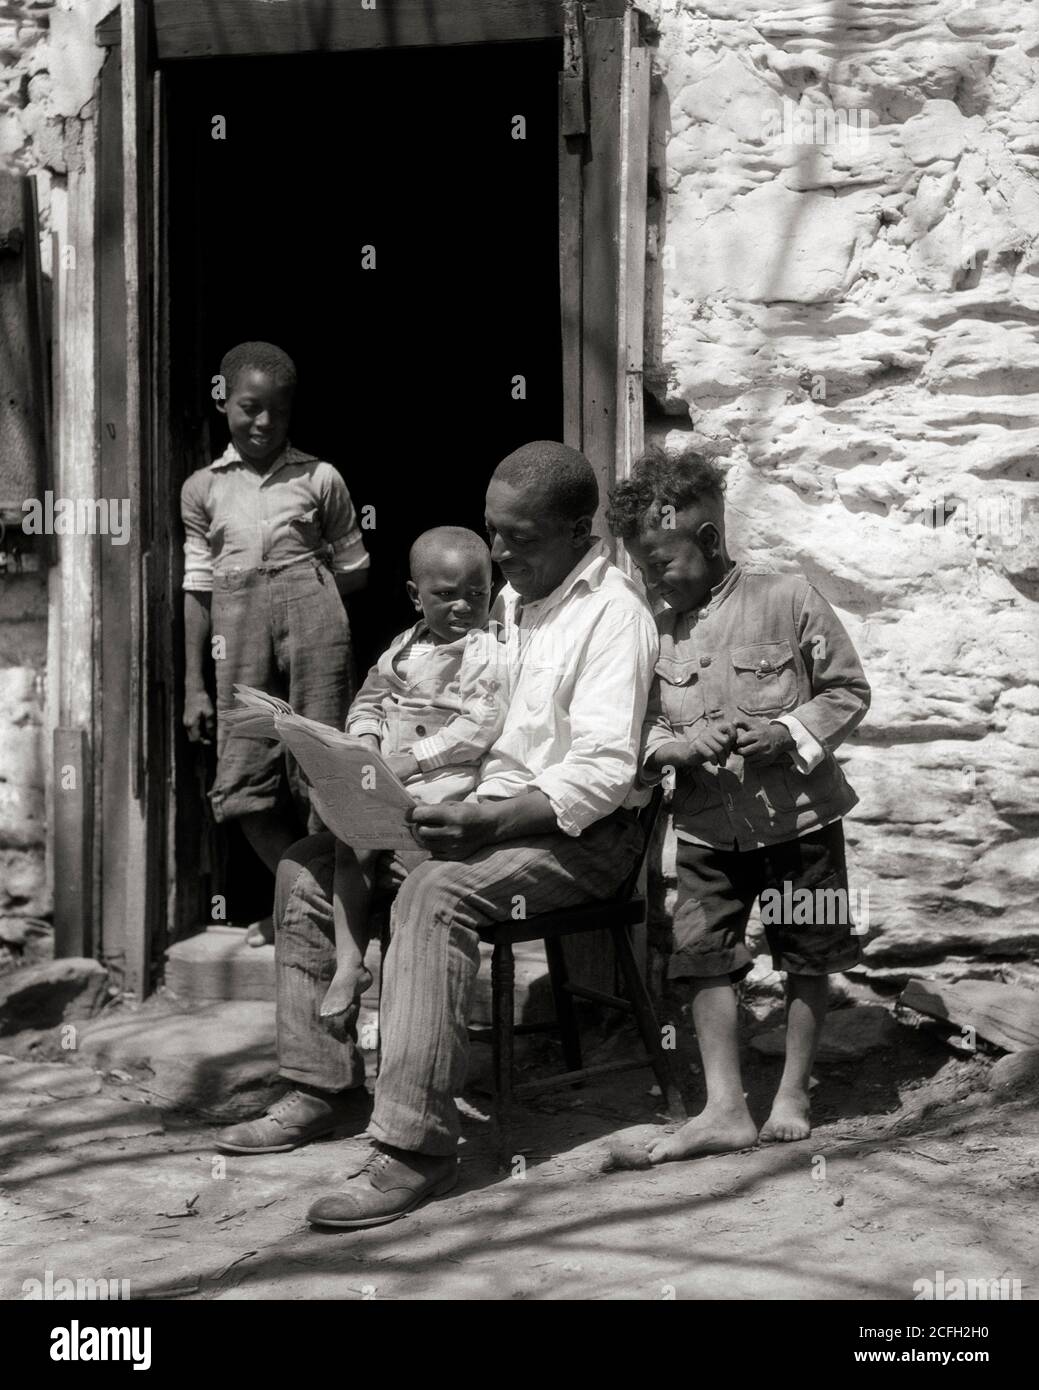 1930s SOLITARY AFRICAN-AMERICAN MAN FATHER SEATED IN BUILDING DOORWAY READING NEWSPAPER SURROUNDED BY THREE BOYS SONS - n947 HAR001 HARS 1 JUVENILE COMMUNICATION INFORMATION SONS FAMILIES LIFESTYLE PARENTING POOR RURAL HOME LIFE SEATED UNITED STATES COPY SPACE FULL-LENGTH PERSONS UNITED STATES OF AMERICA MALES FATHERS B&W NORTH AMERICA NORTH AMERICAN DISCOVERY AFRICAN-AMERICAN DADS SURROUNDED PRIDE BY SOUTHERN CONCEPTUAL DISADVANTAGED SOLITARY GROWTH INEQUITY JUVENILES MID-ADULT MID-ADULT MAN TOGETHERNESS BLACK AND WHITE HAR001 OLD FASHIONED Stock Photo